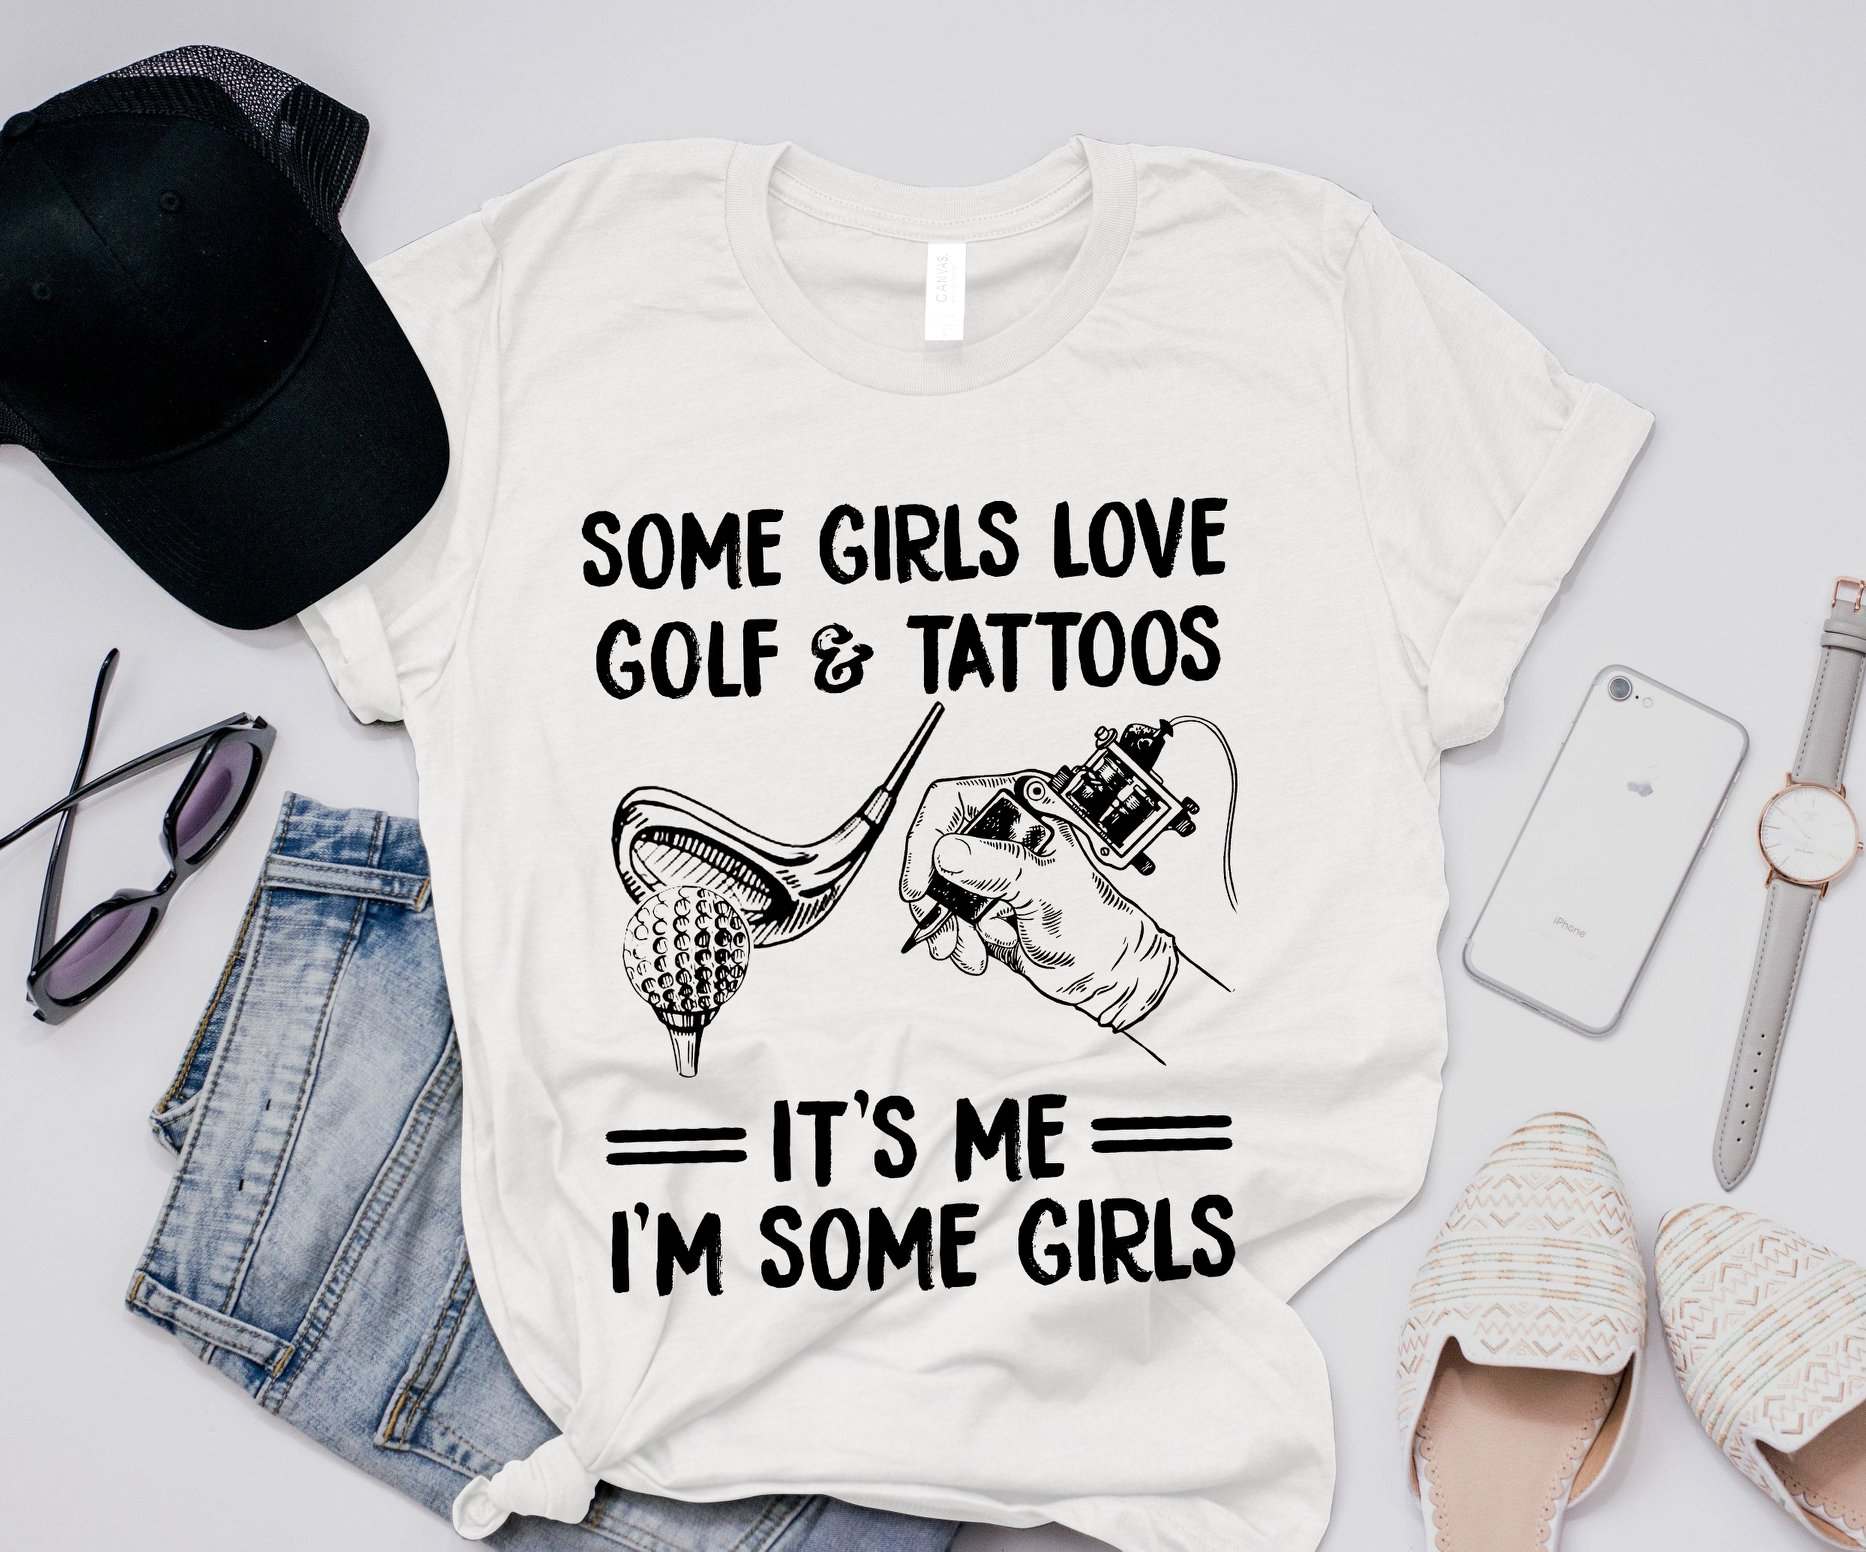 Some girls love golf and tattoos - The golfer